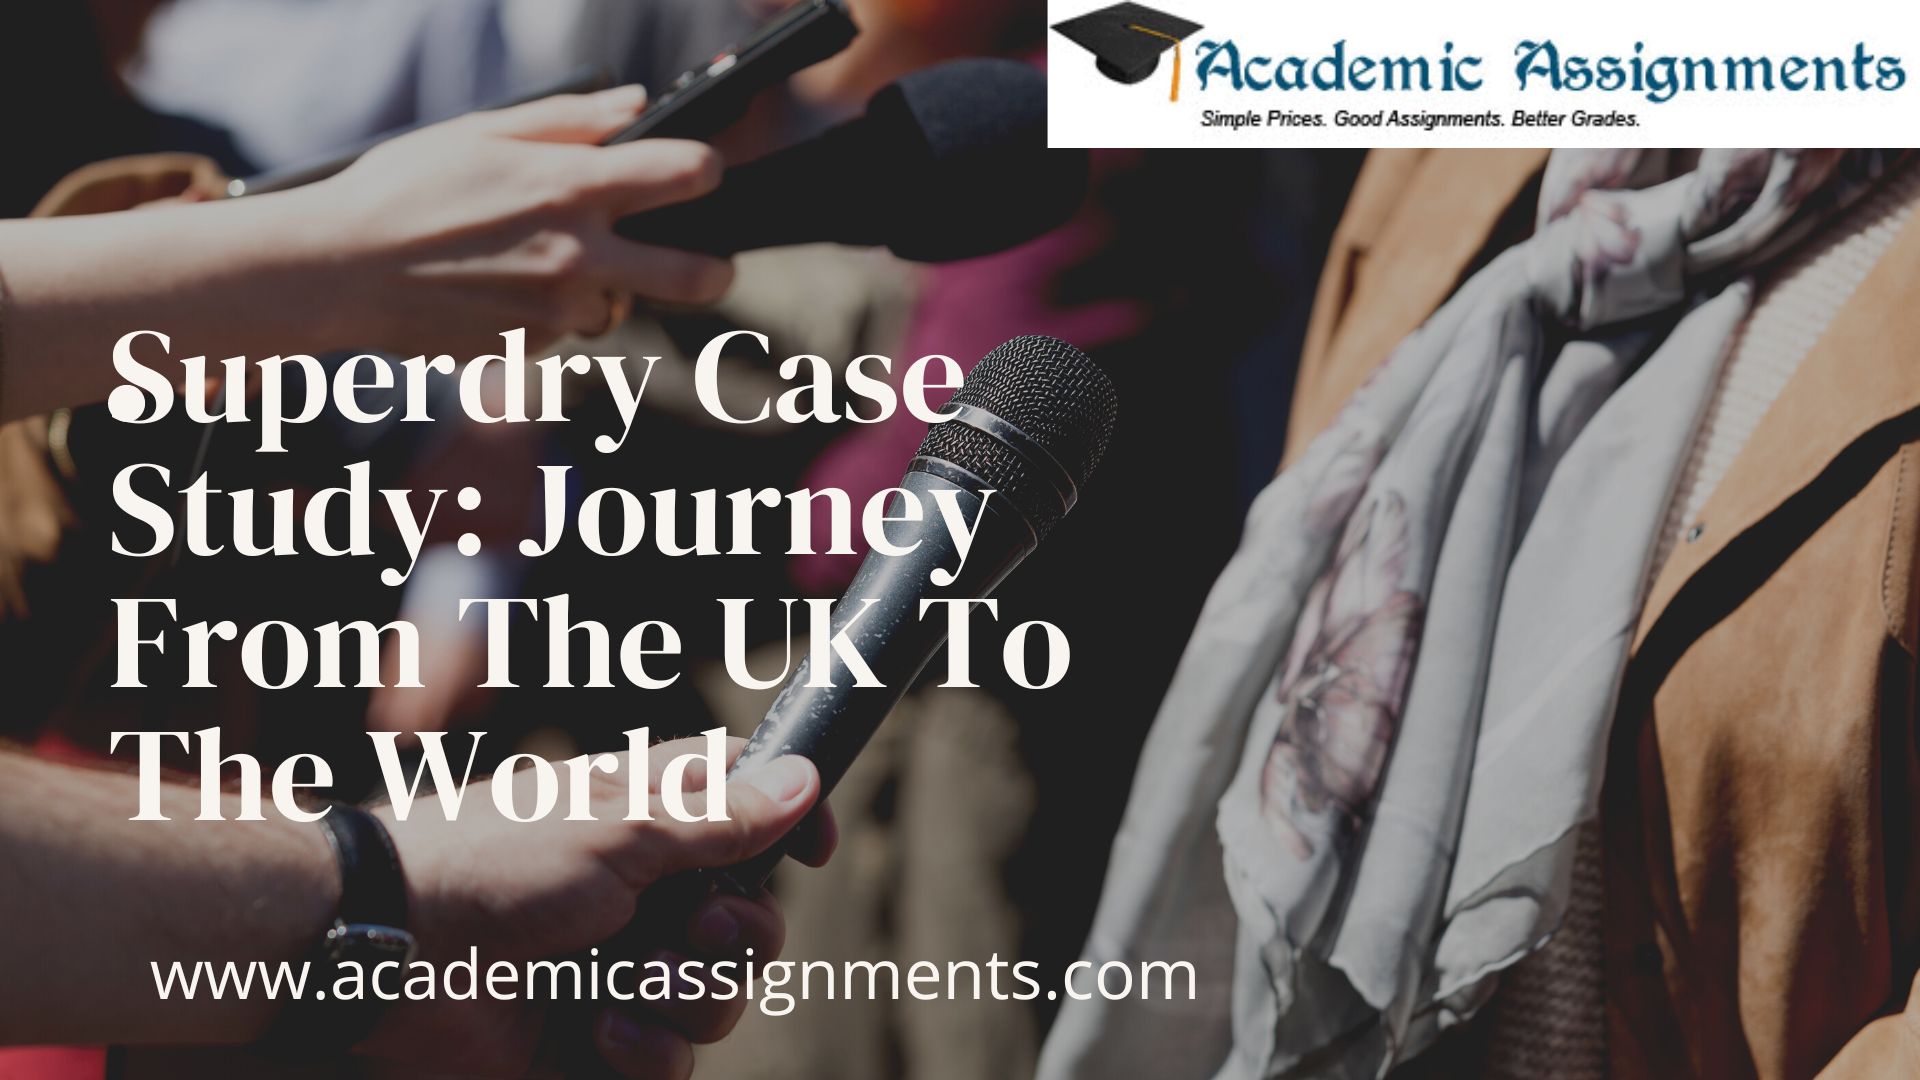 Superdry Case Study Journey From The UK To The World